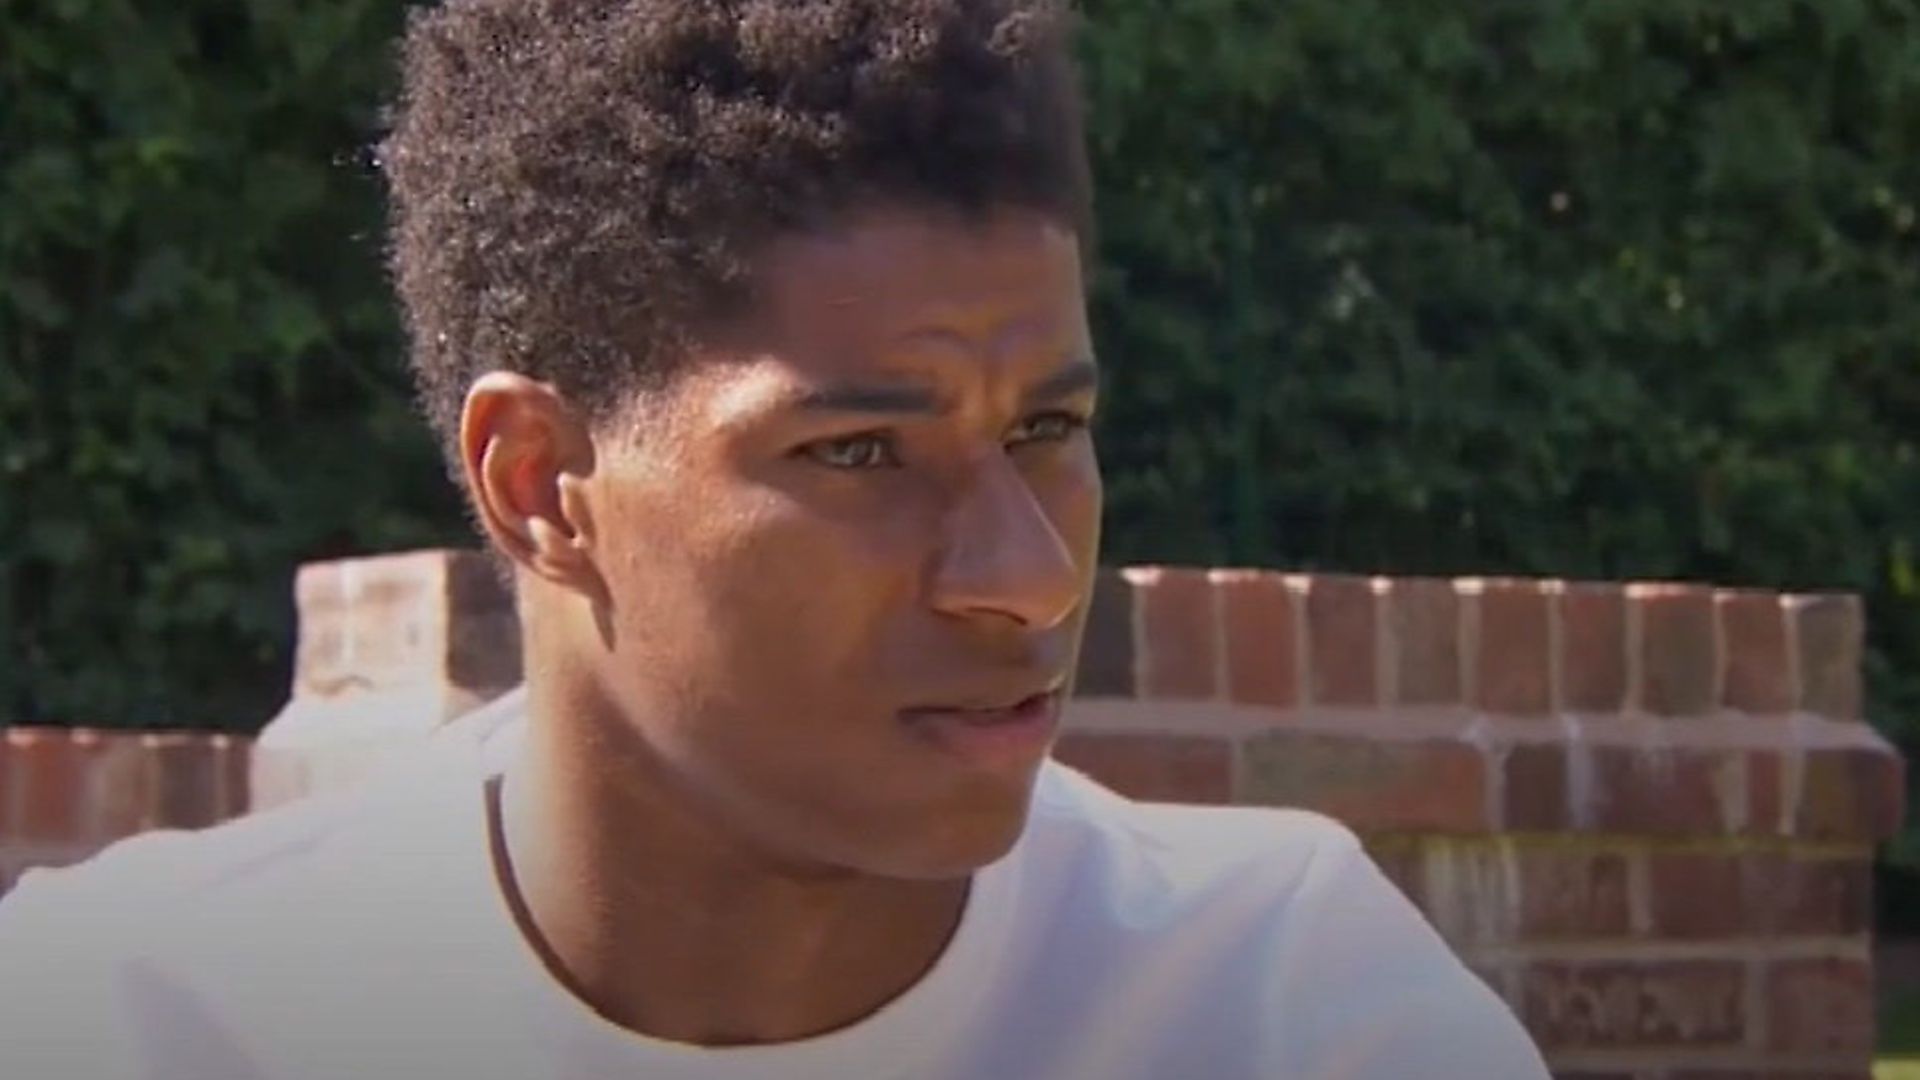 Manchester United's Marcus Rashford during an interview with BBC Breakfast - Credit: BBC